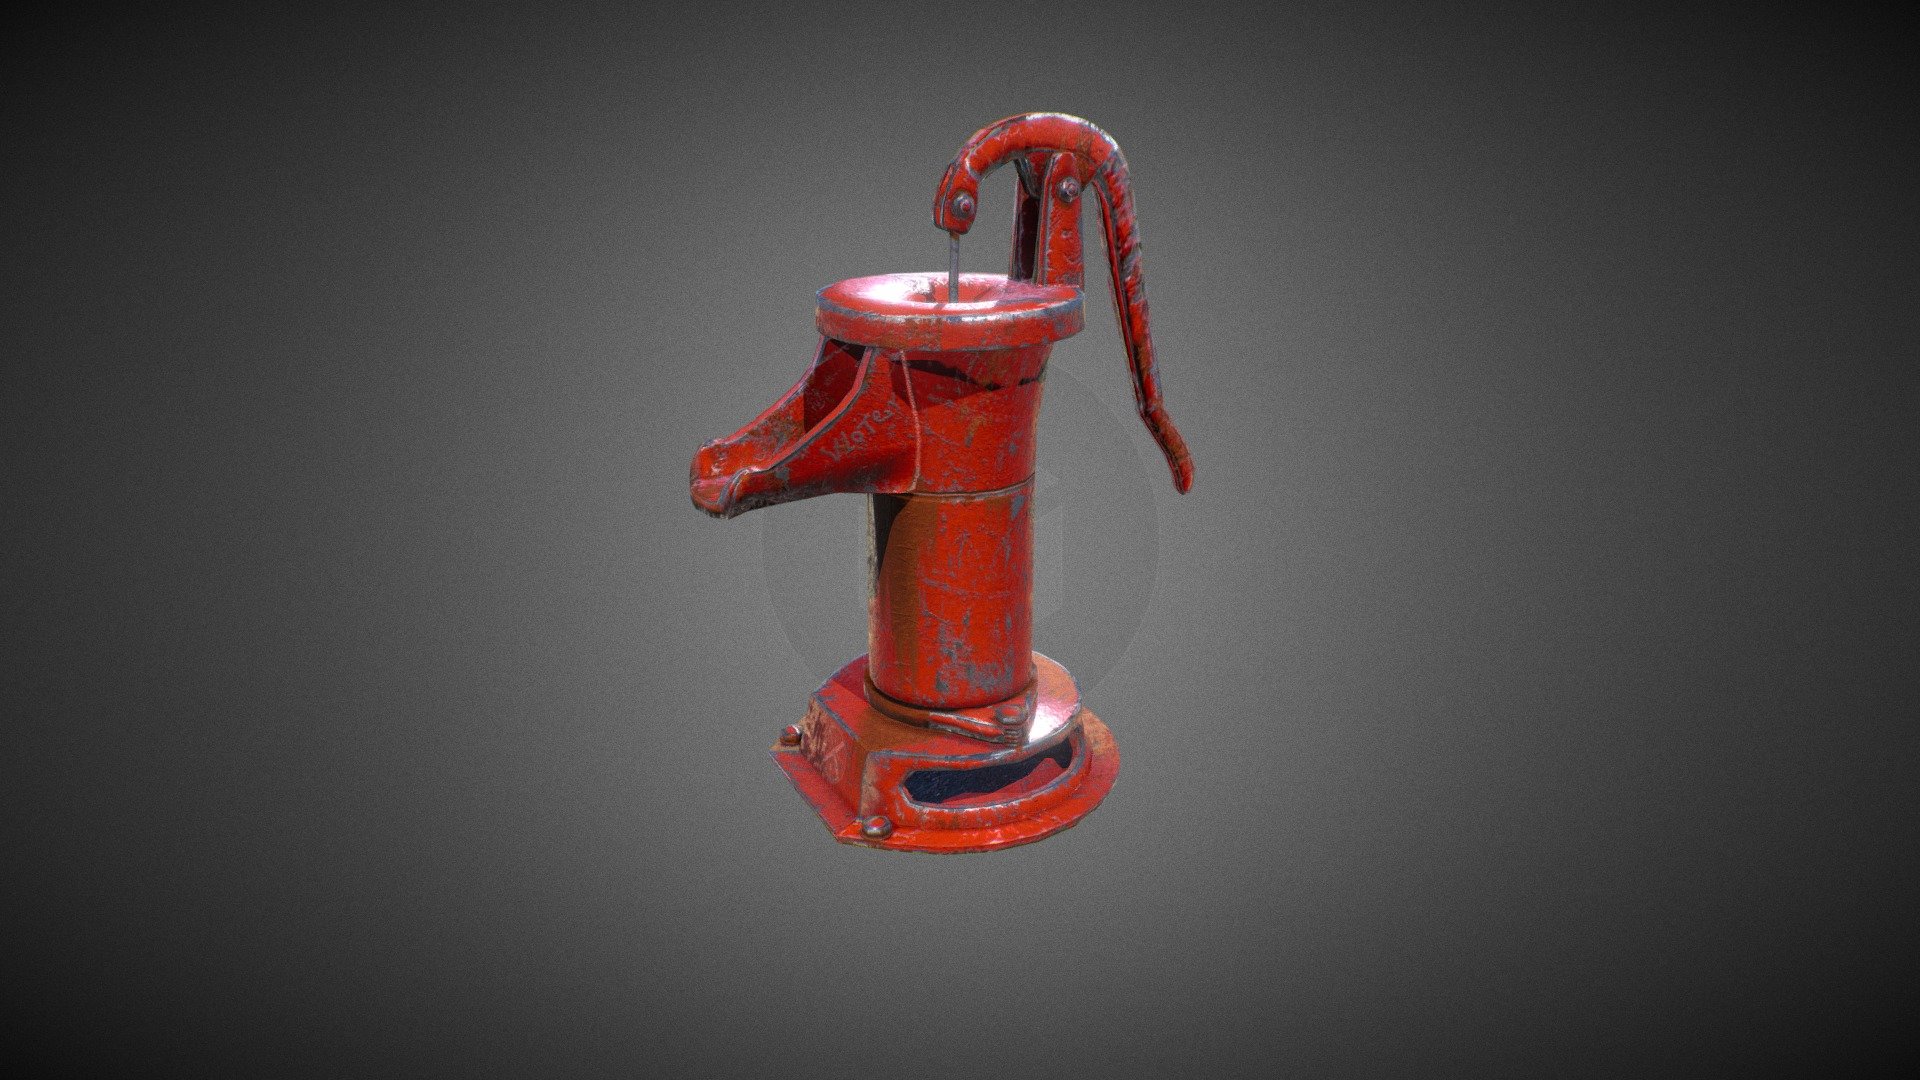 Who wants some water with surround sound? !! ))
Created in Maya, Marmoset Toolbag 3 and Substance Painter. :) - Old Water Pump - 3D model by spacex 3d model